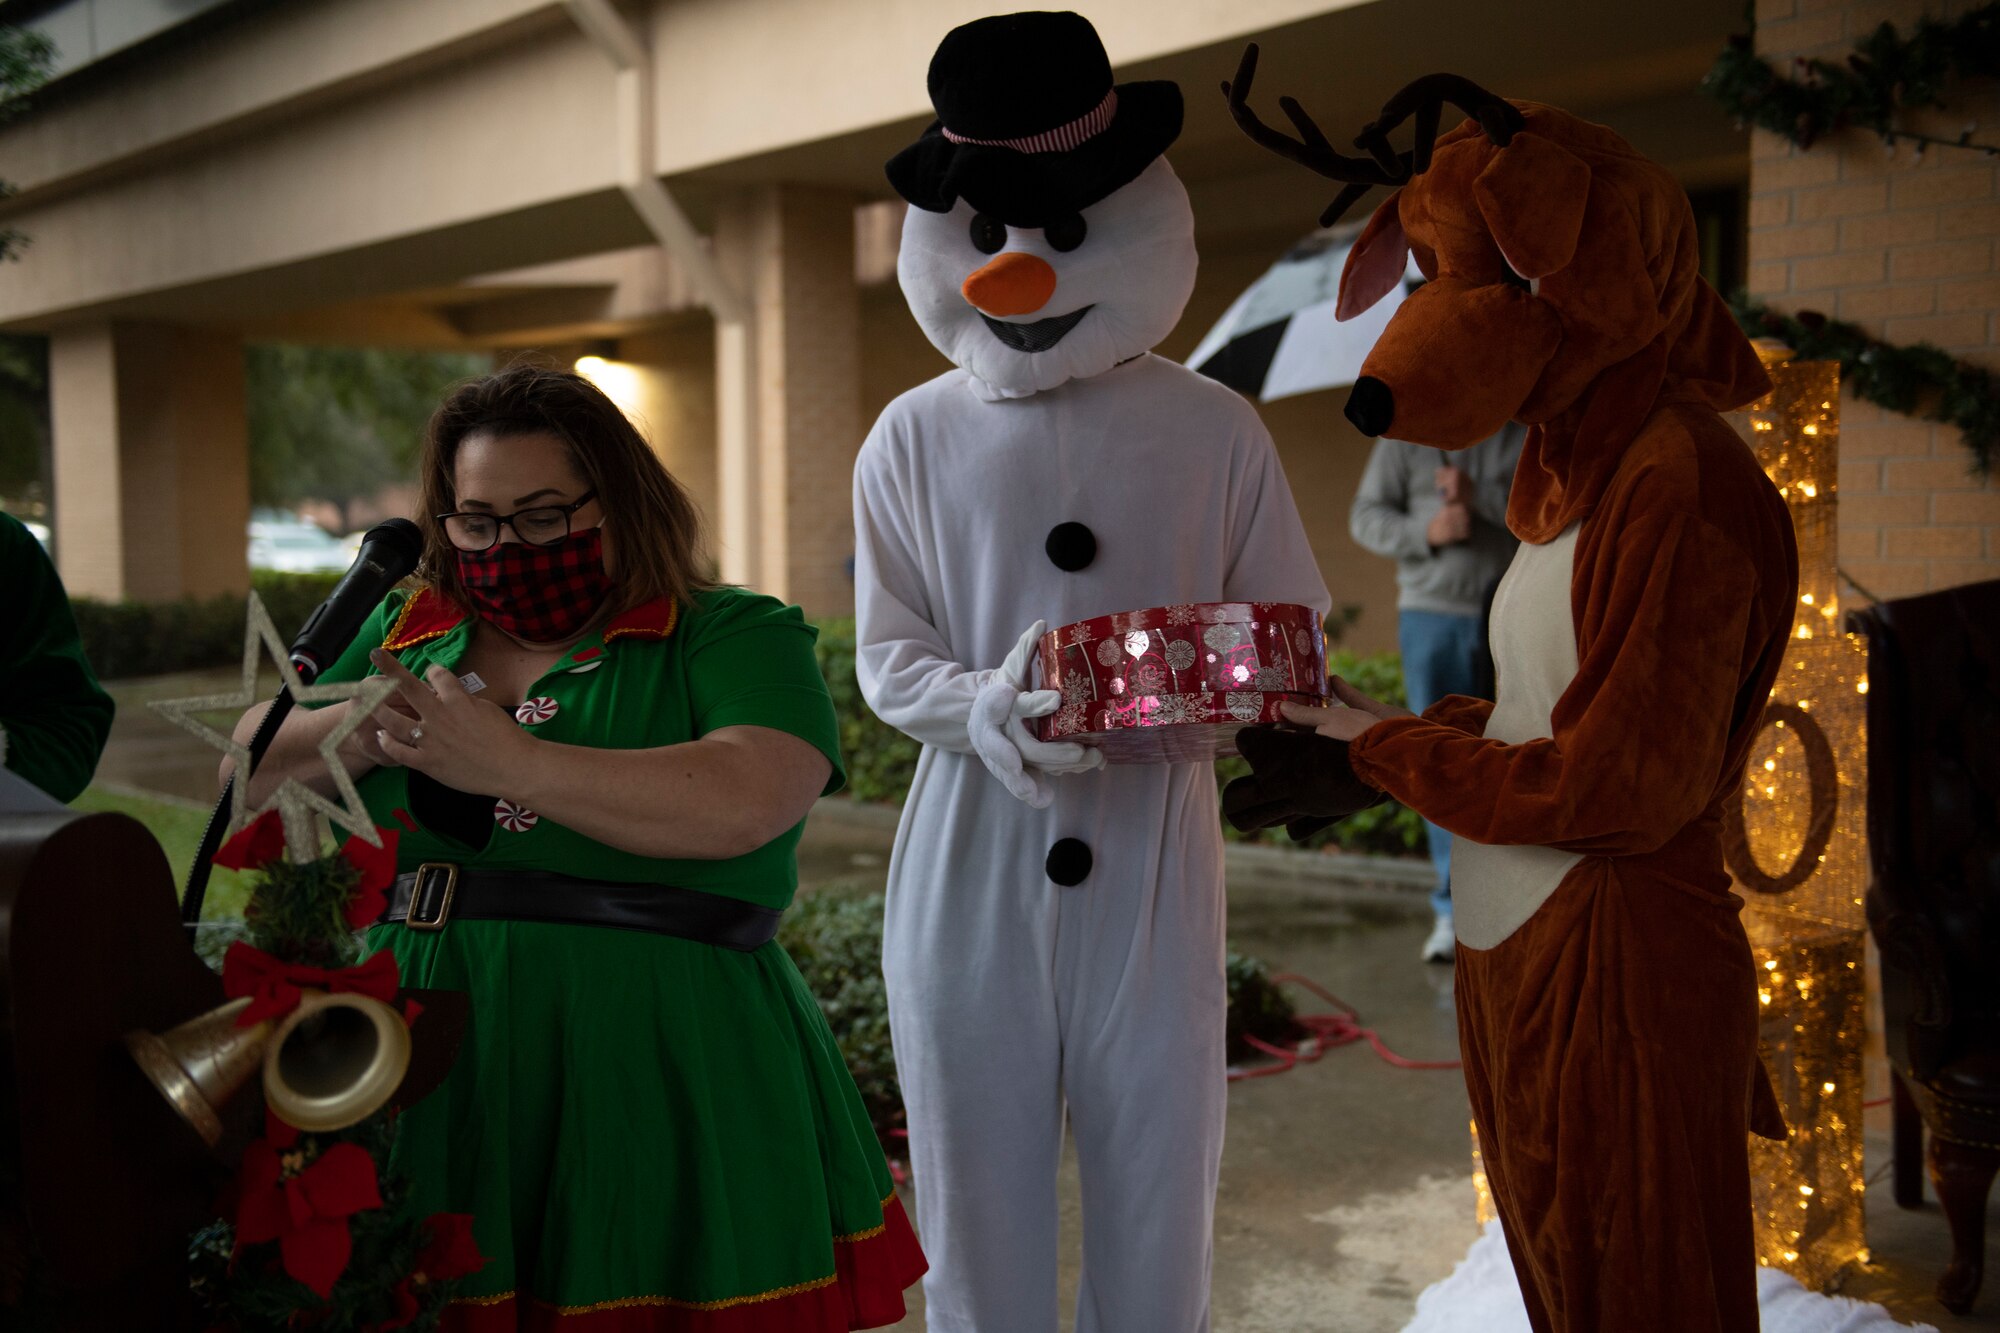 A photo of Sarah Pfau, a snowman costume and a reindeer costume, announcing the winners of a raffle during a virtual tree-lighting ceremony.